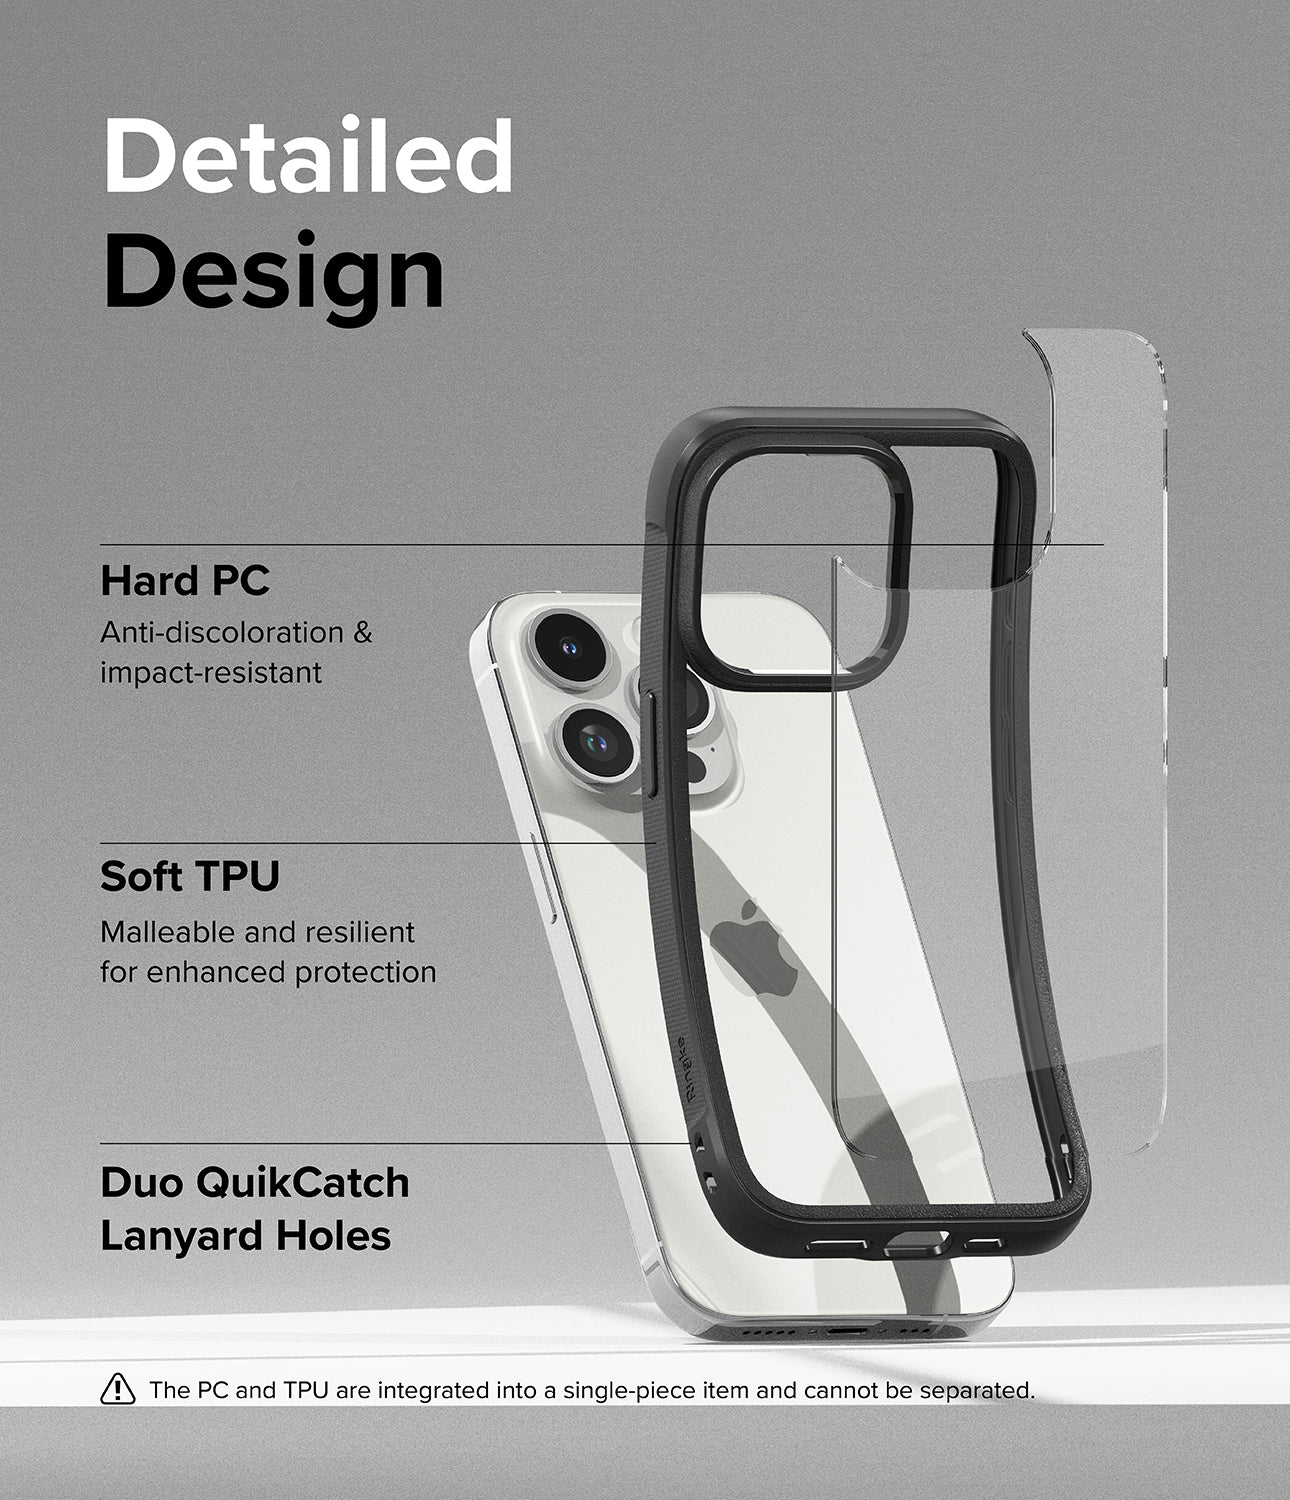 iPhone 15 Pro Max Case | Fusion Bold Black - Detailed Design. Anti-discoloration and impact-resistant with Hard PC. Malleable and resilient for enhanced protection with Soft TPU. Duo QuikCatch Lanyard Holes